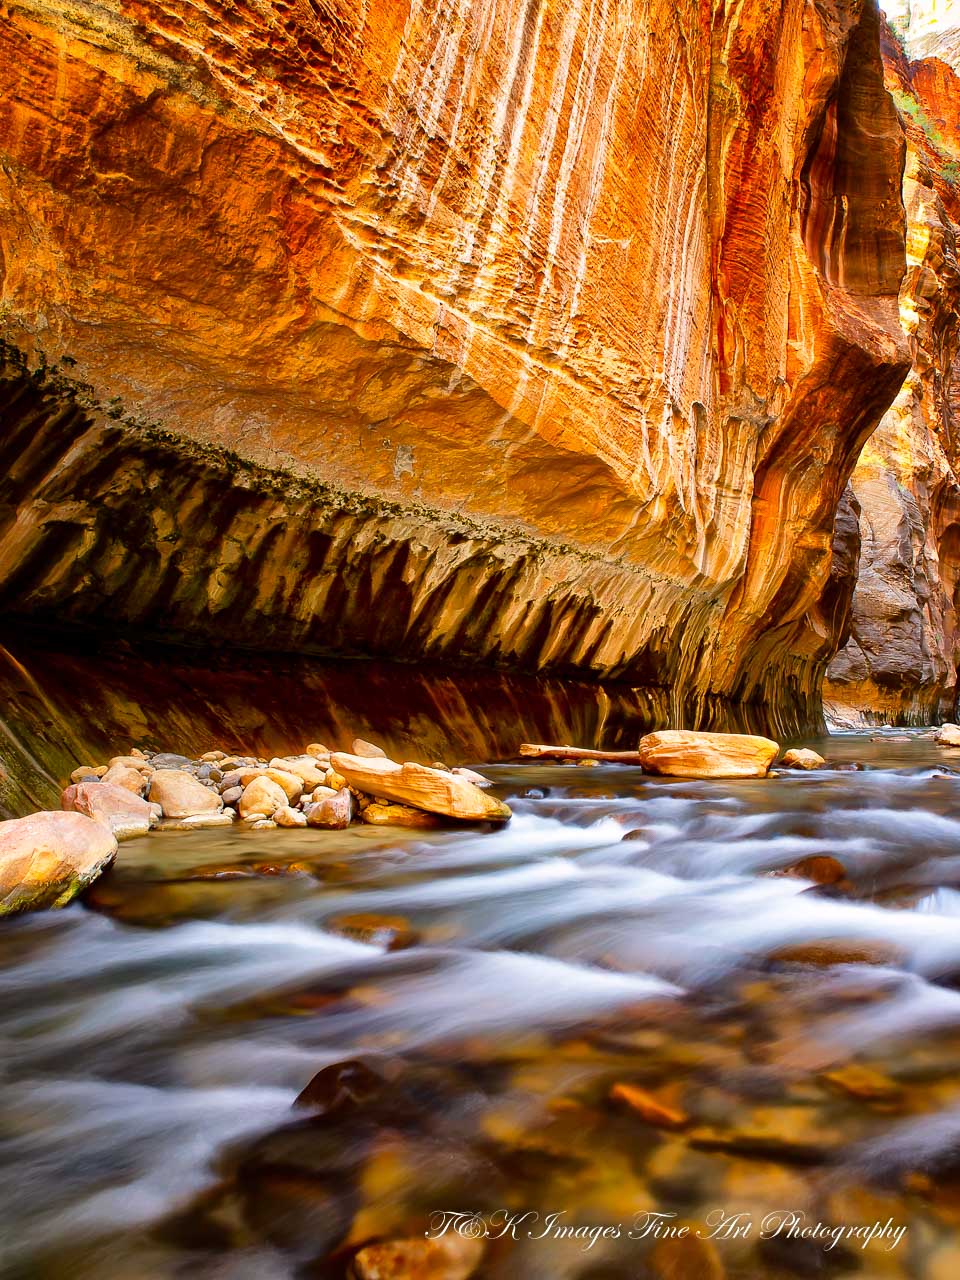 The Narrows Zion National Park - 3